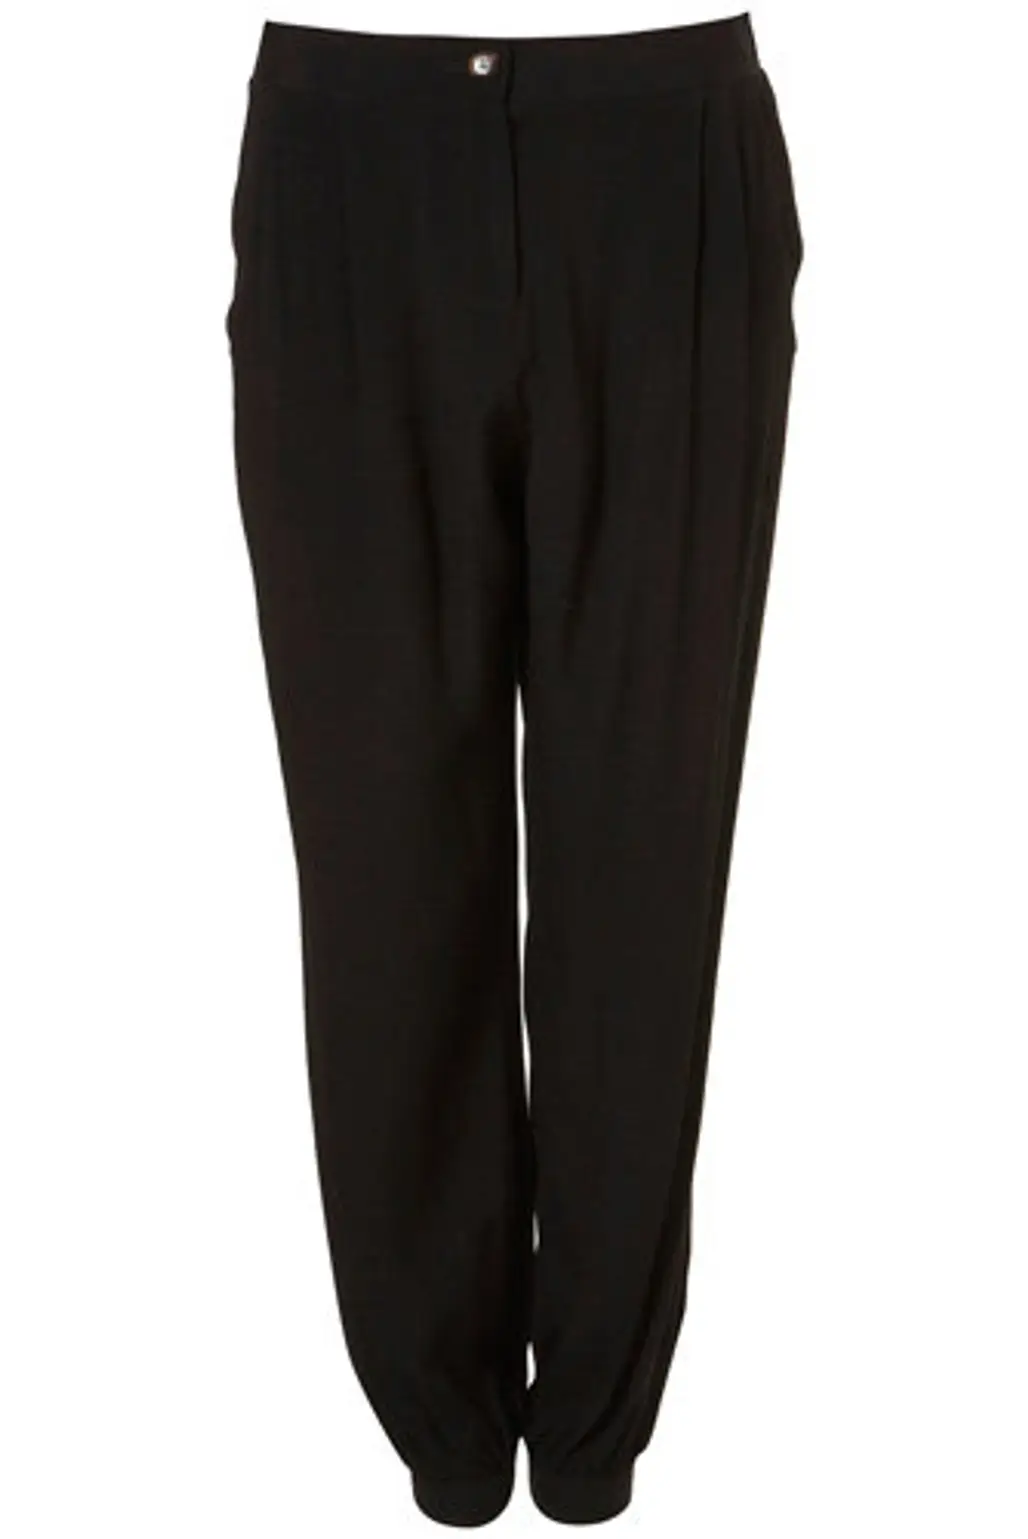 Topshop Black Jersey Cuff Crepe Trousers